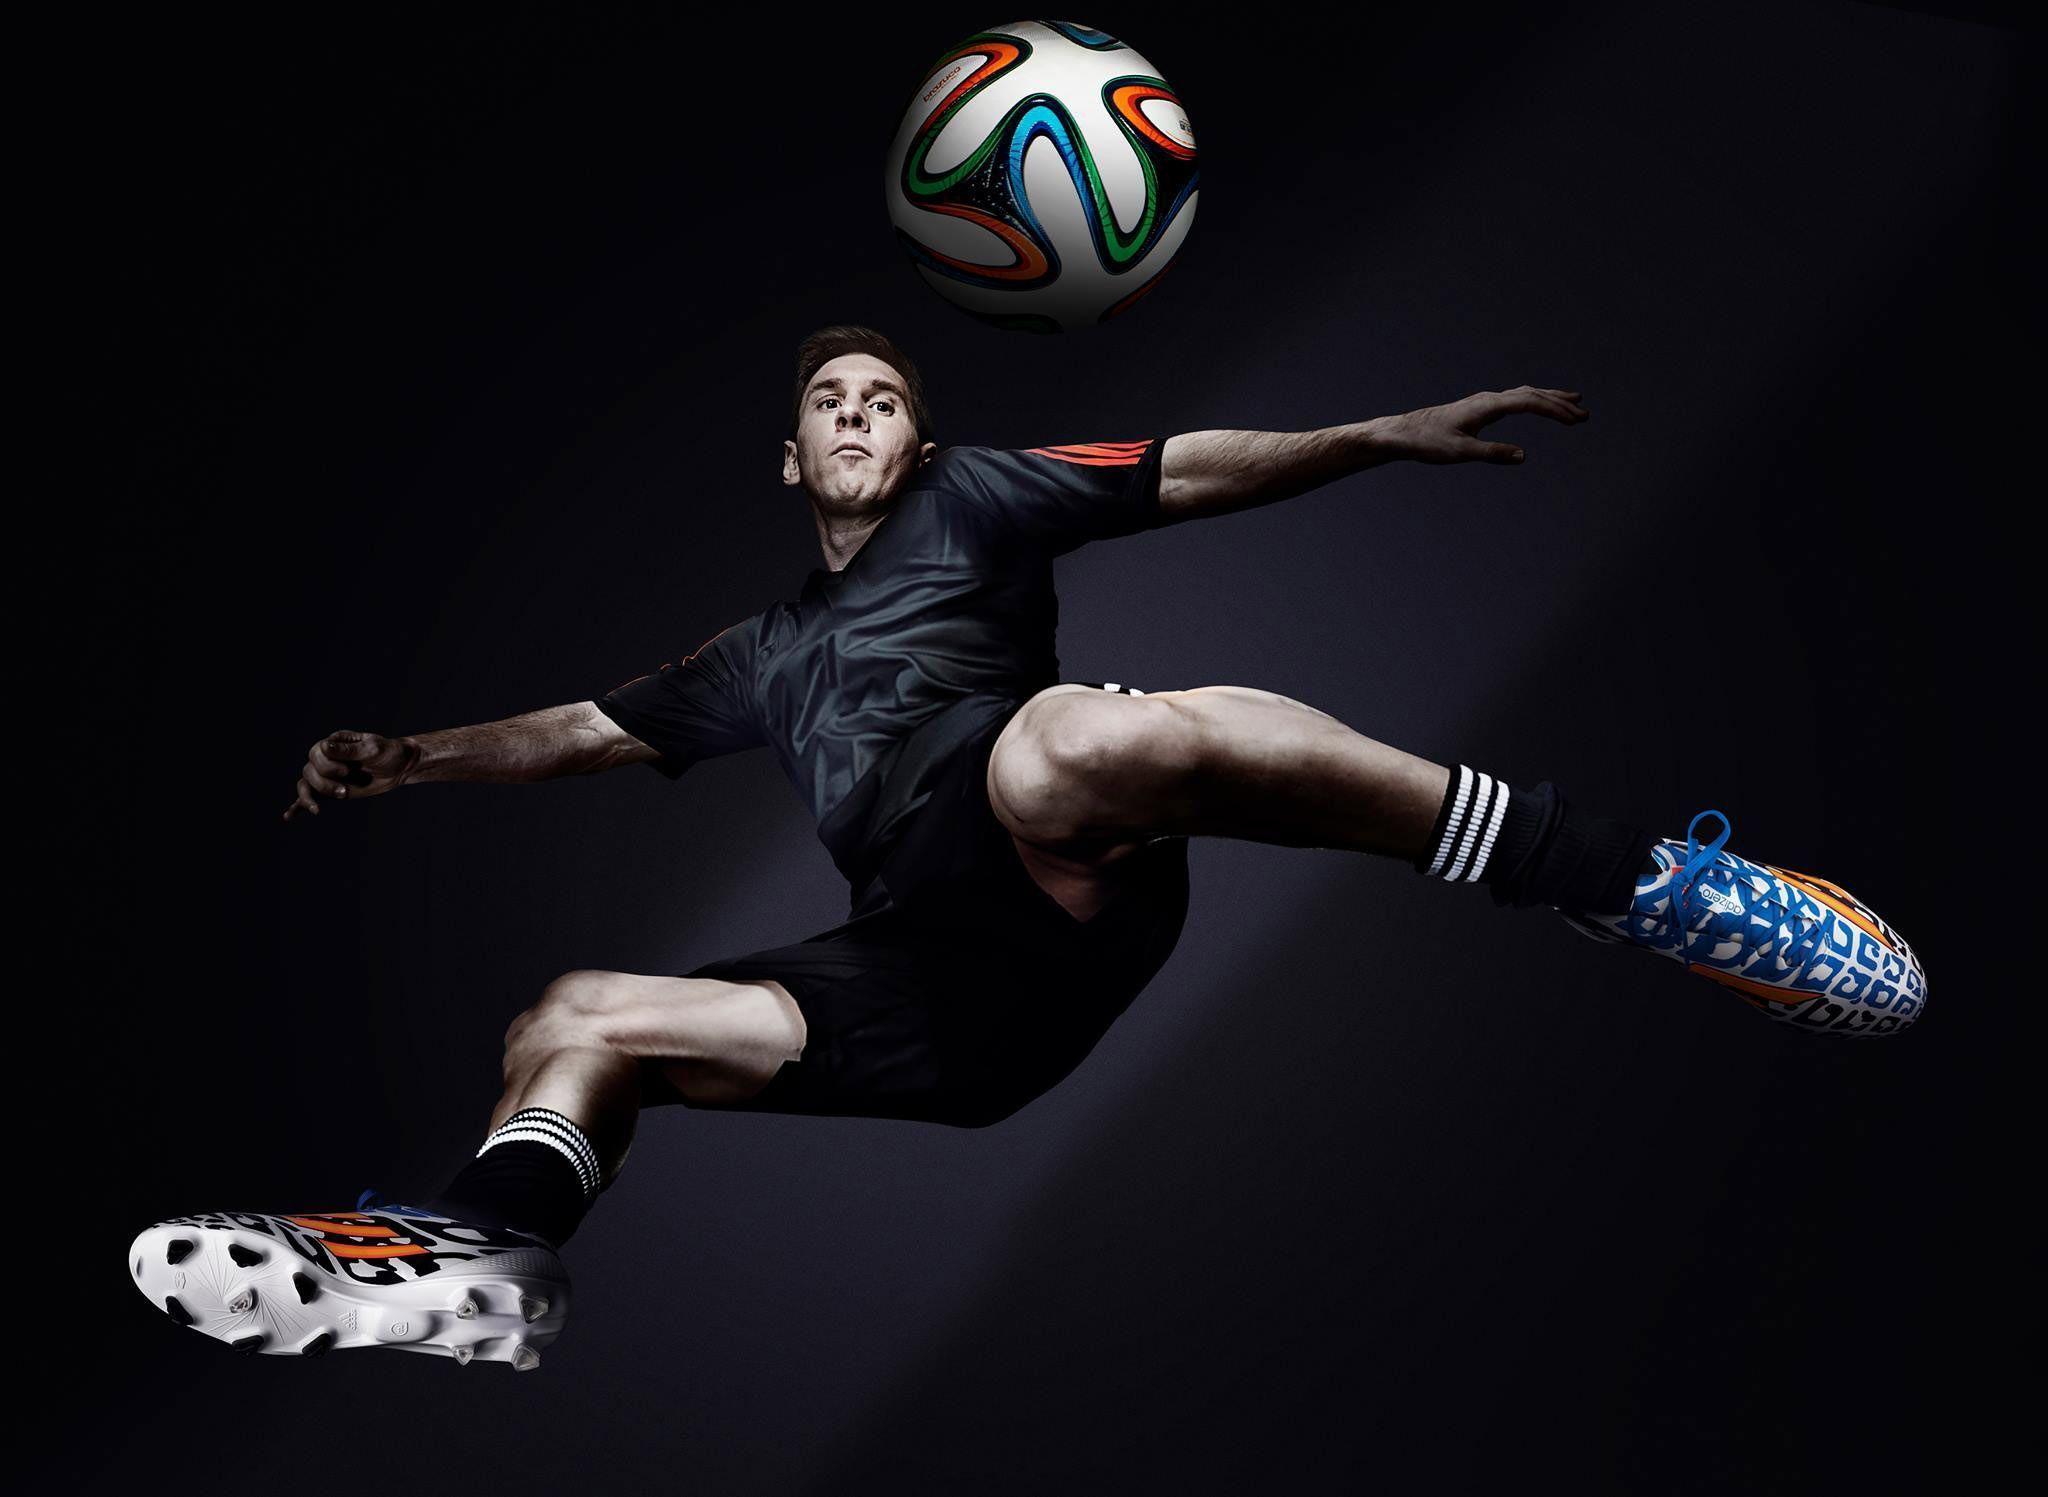 Leo Messi Argentina Adidas 2014 FIFA World Cup Wallpaper Wide or